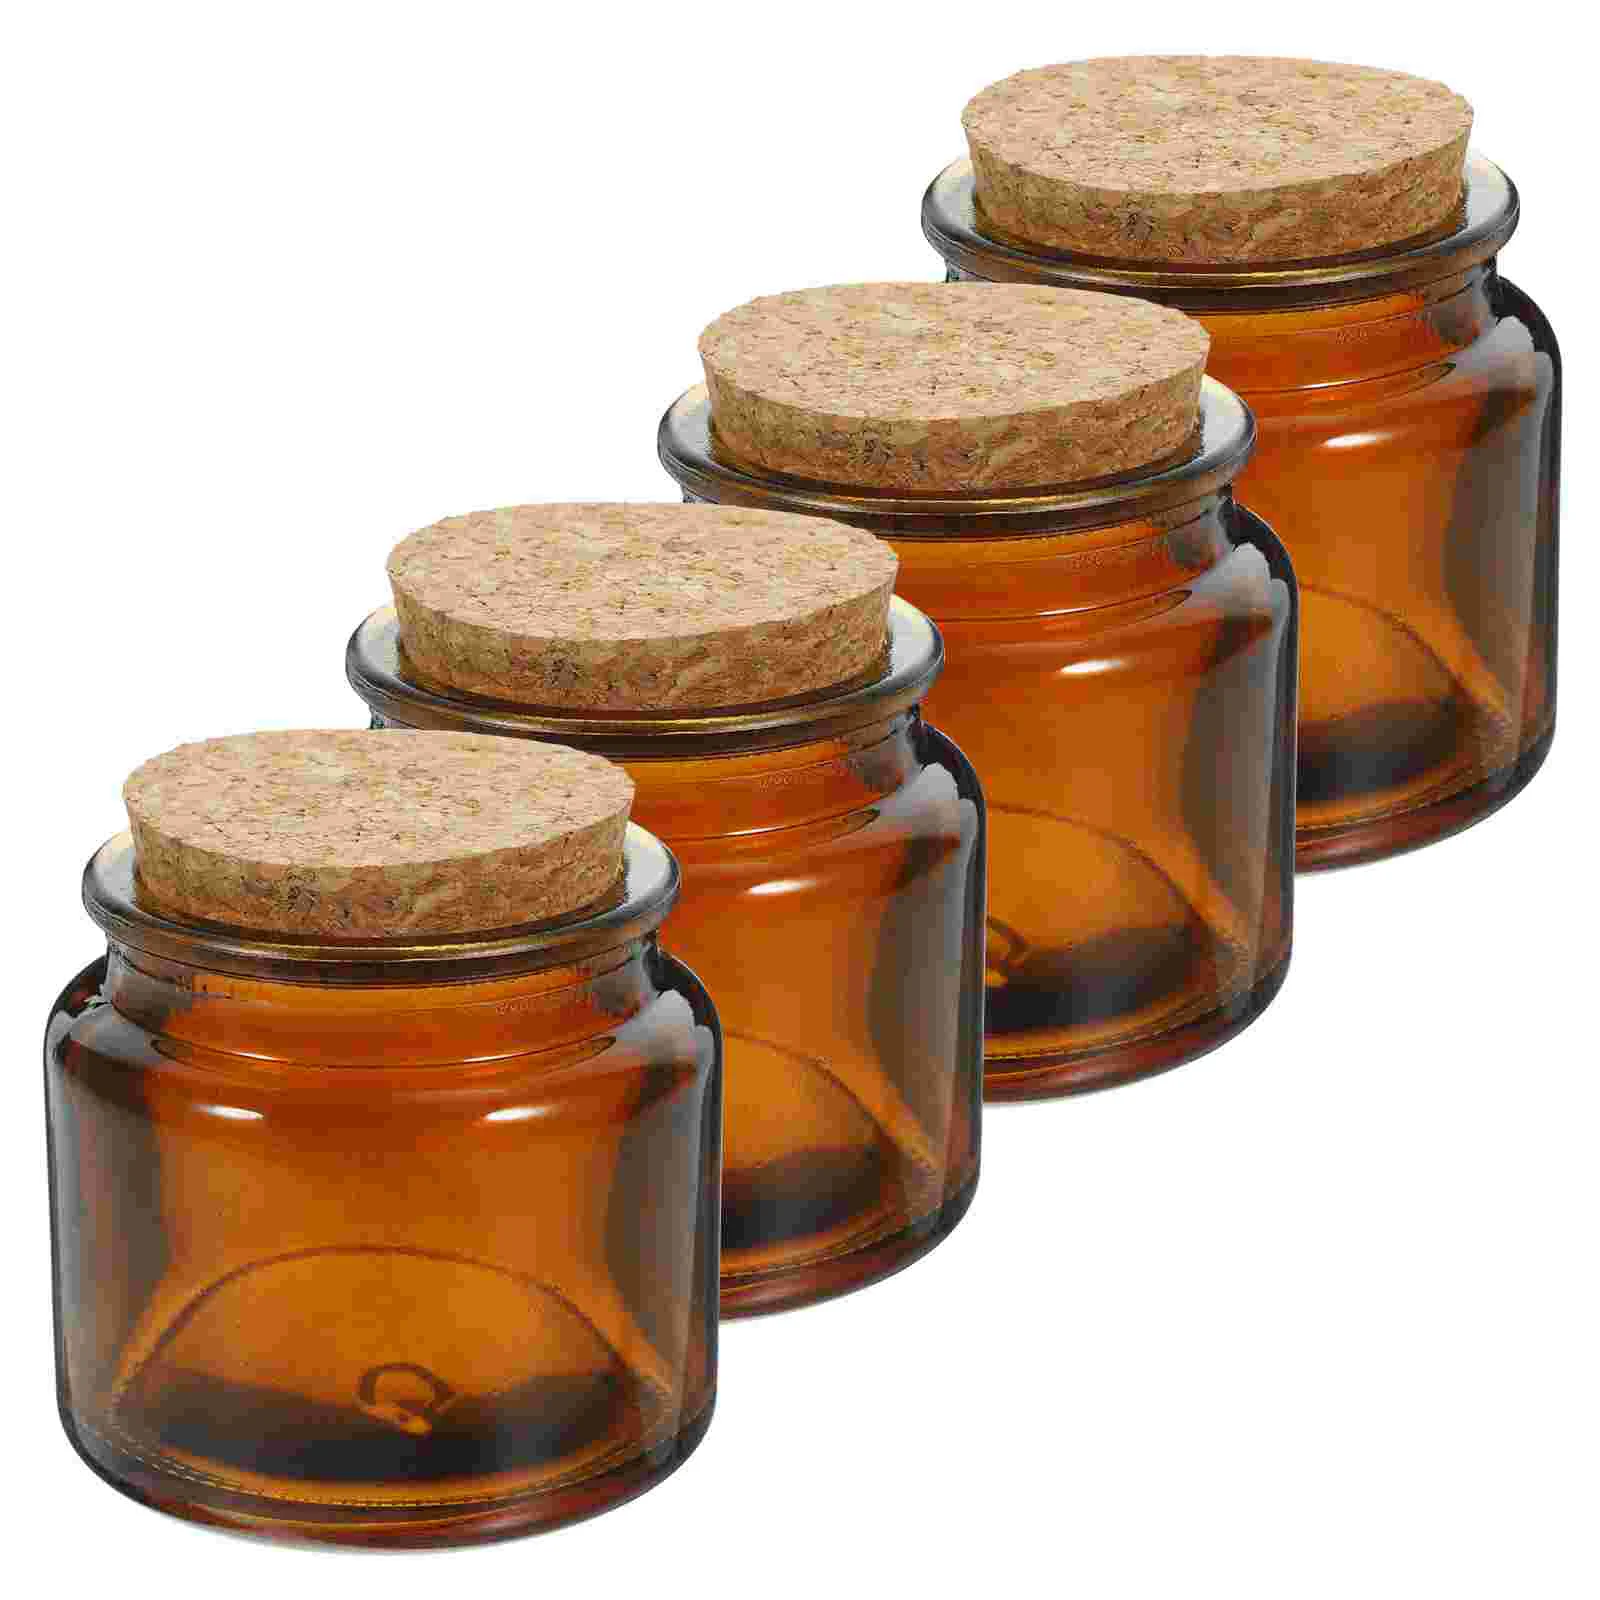 

4 Pcs Glass Votive Tealight Holder Scented Cup Holders Centerpieces Bottles Container Wood Table Dinner Party Sticks